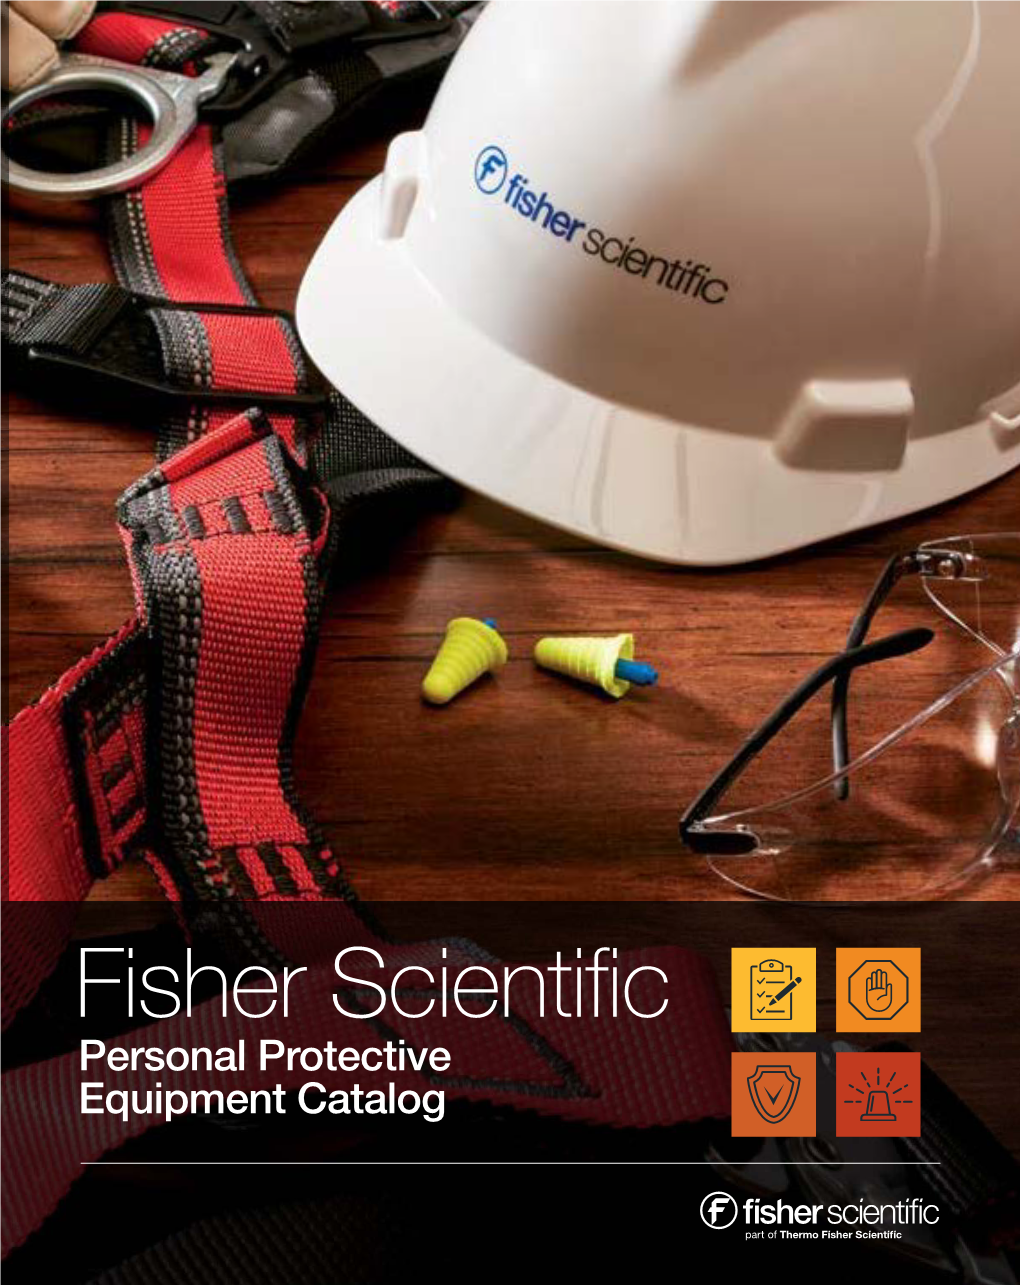 Fisher Scientific™ Channel As Your Trusted Safety Resource to Help Protect Your Most Valuable Assets: Your People, Your Facilities, and the Environment